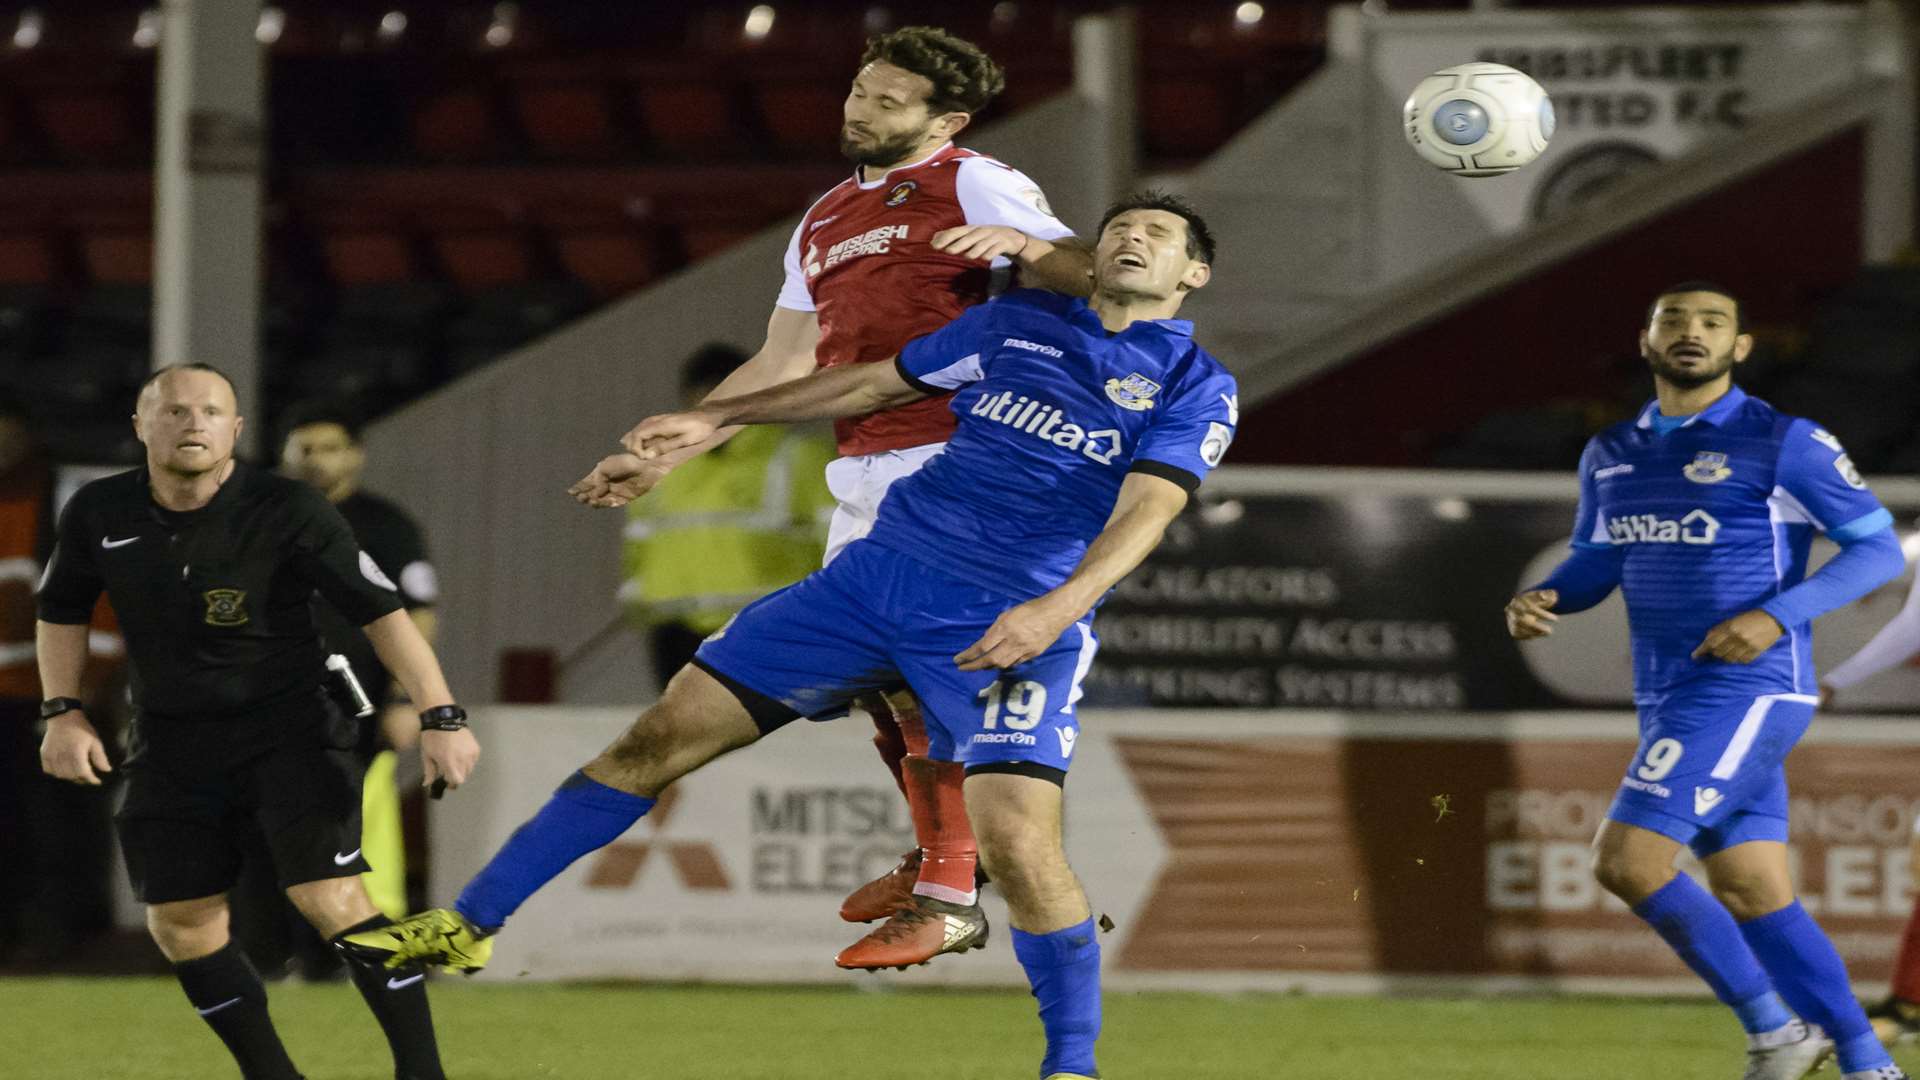 Dean Rance outjumps Danny Hollands Picture: Andy Payton